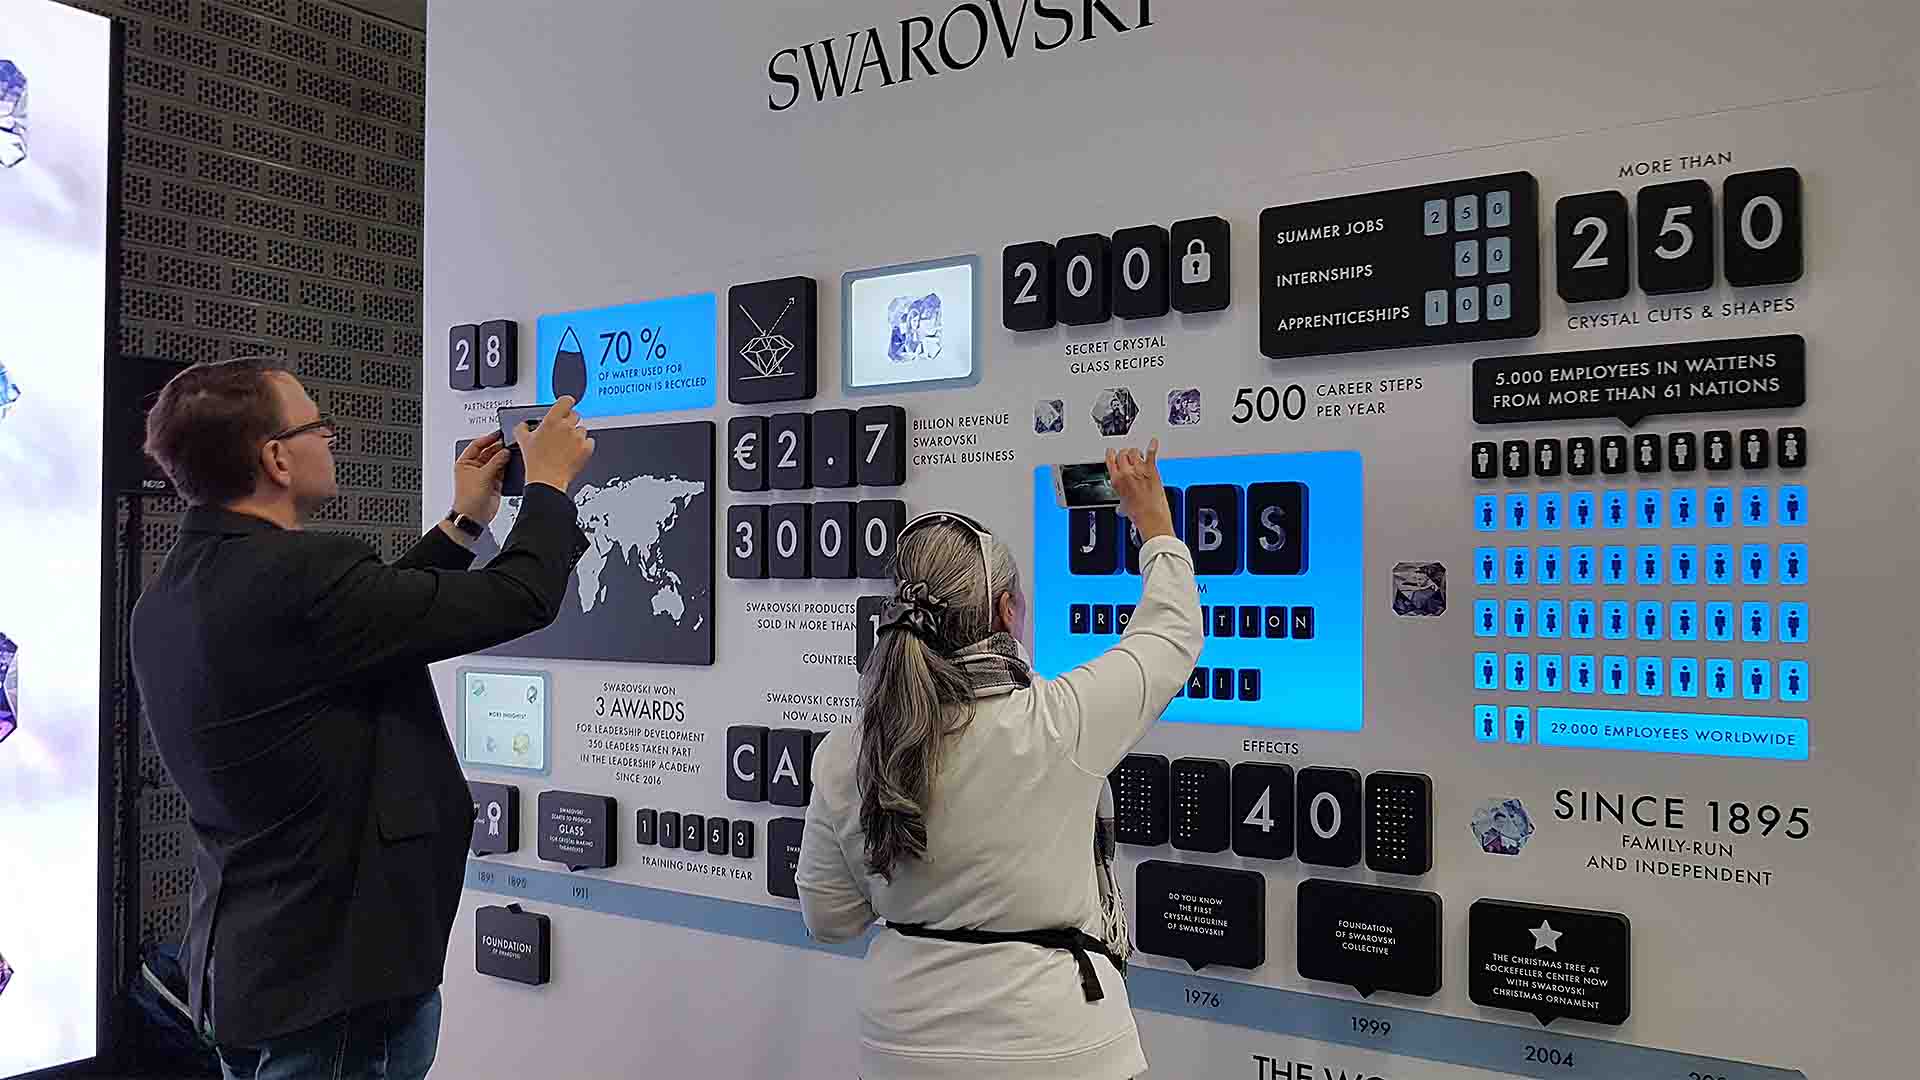 Swarovski‘s „Endless Facets“ Augmented Reality App“ is used to display additional virtual and interactive info at their expo booths.